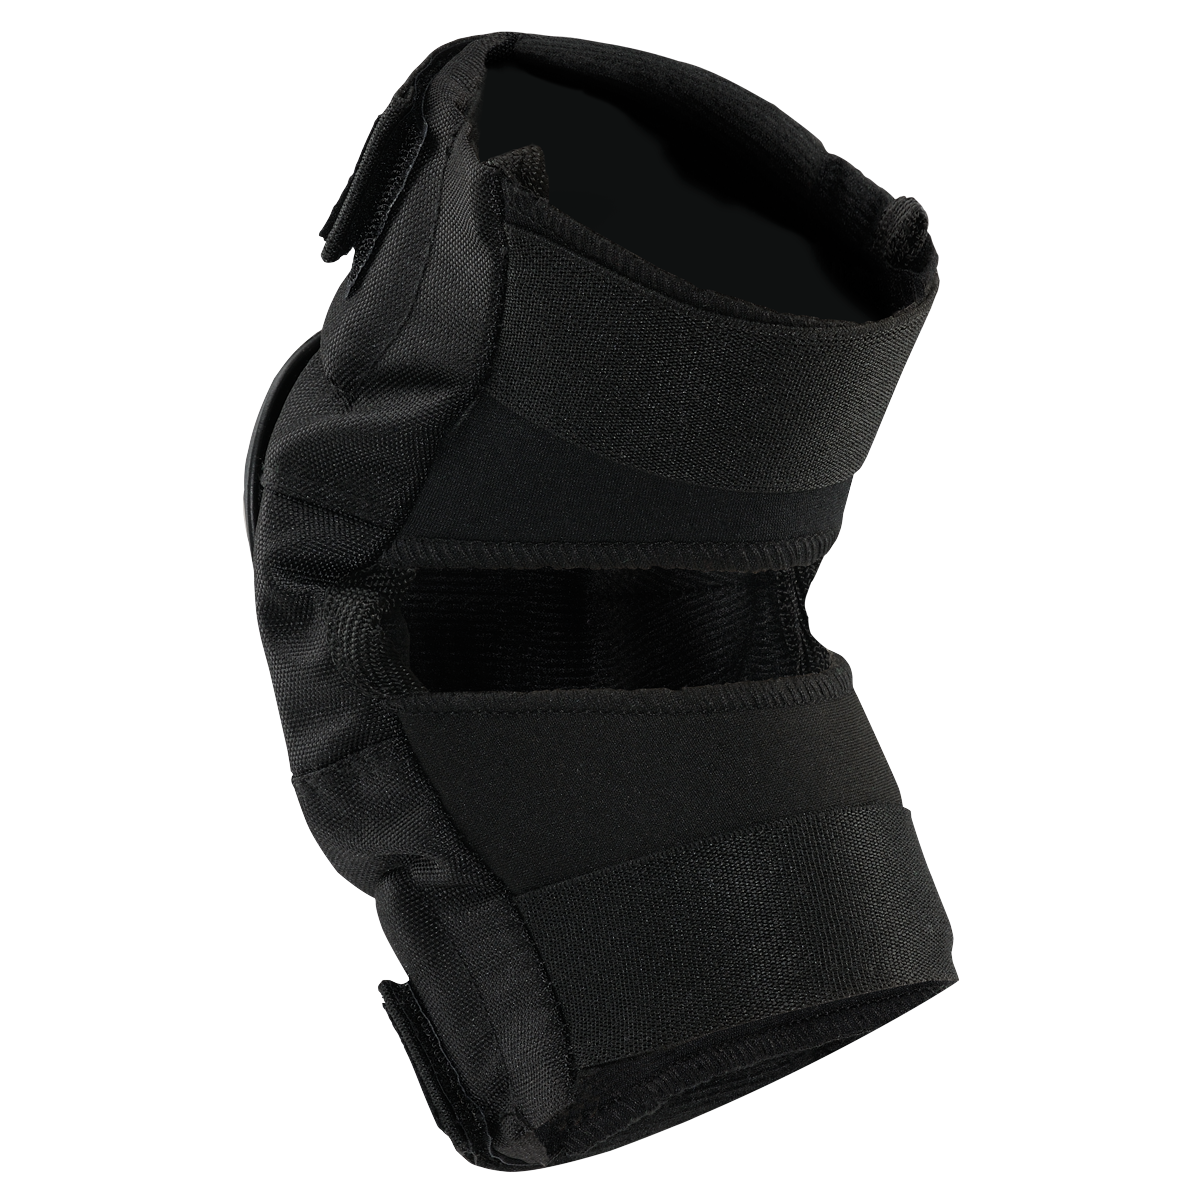 Tactical Elbow Pads, Reliable elbow protection